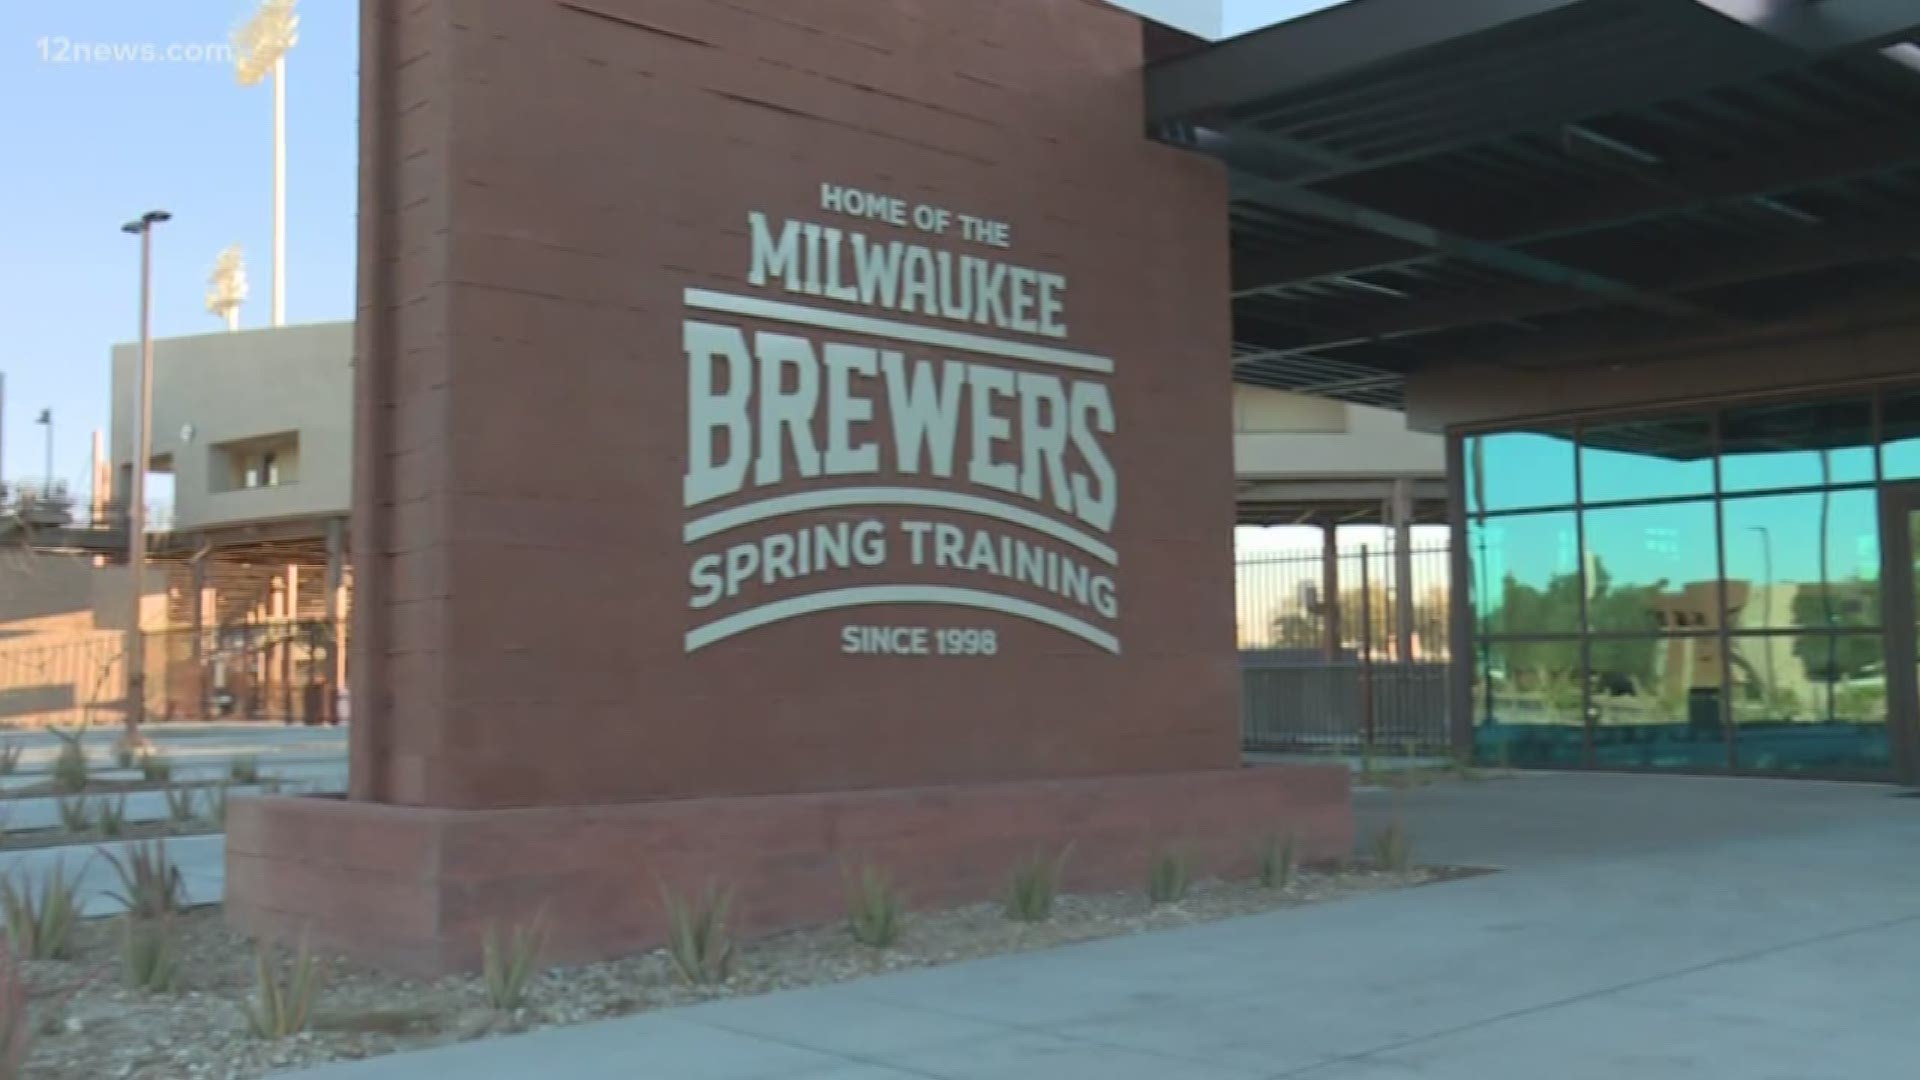 The former Maryvale Baseball Park is now the Brewers Fields of Phoenix. We show you what $60 million in renovations can get you!